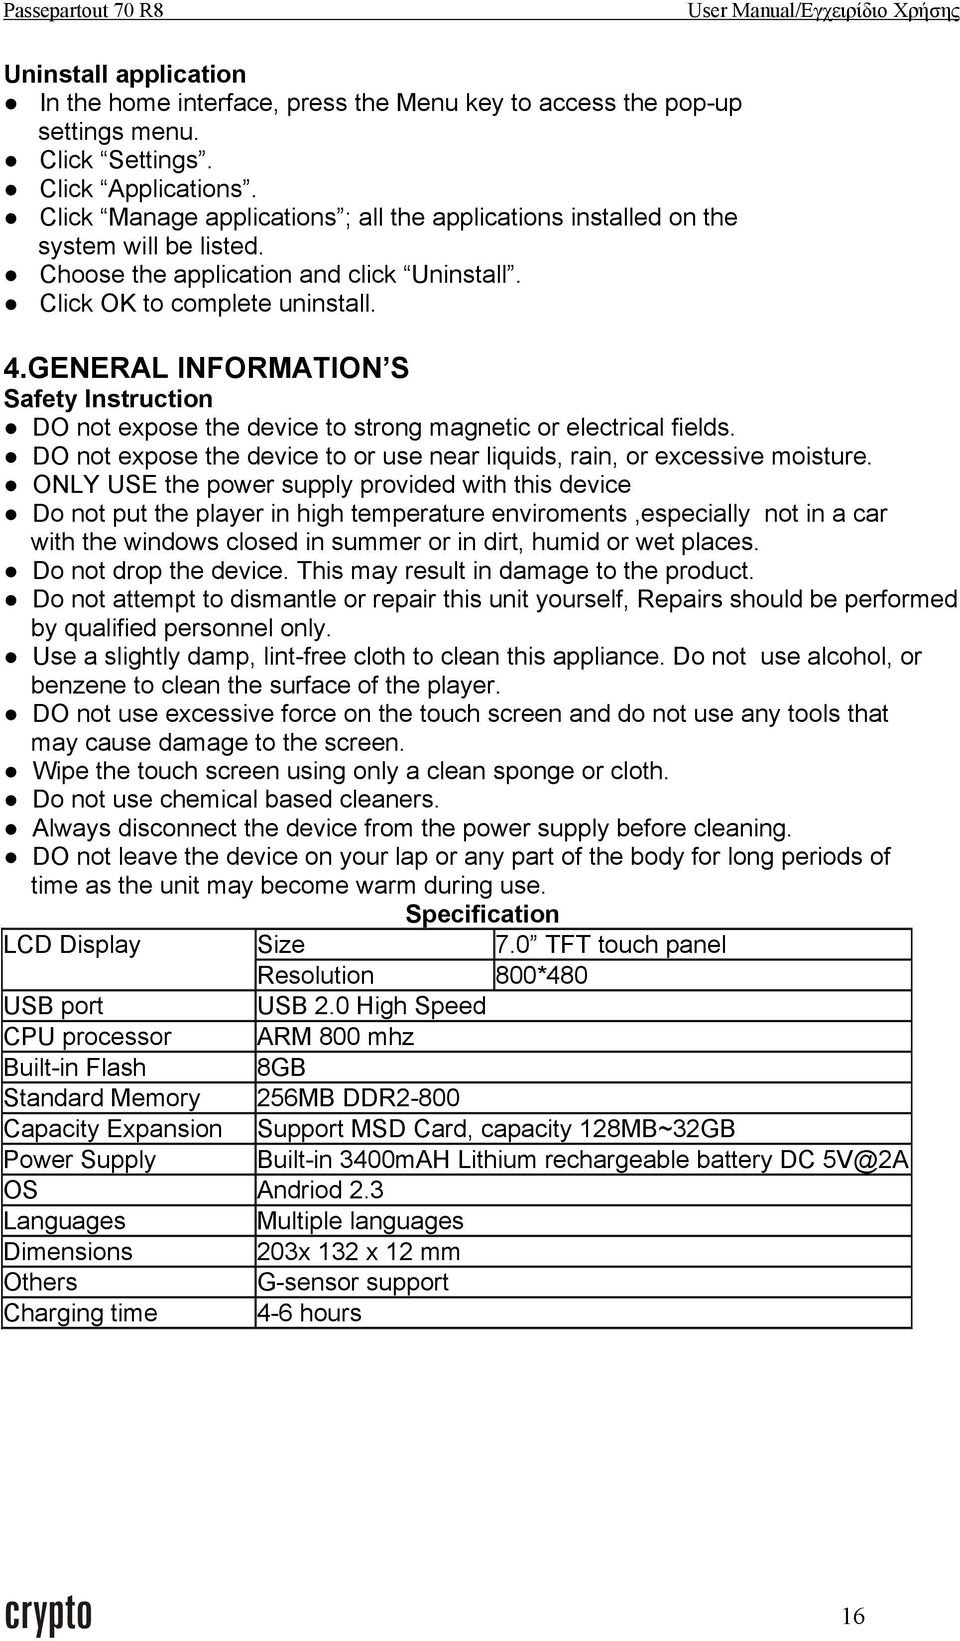 GENERAL INFORMATION S Safety Instruction DO not expose the device to strong magnetic or electrical fields. DO not expose the device to or use near liquids, rain, or excessive moisture.